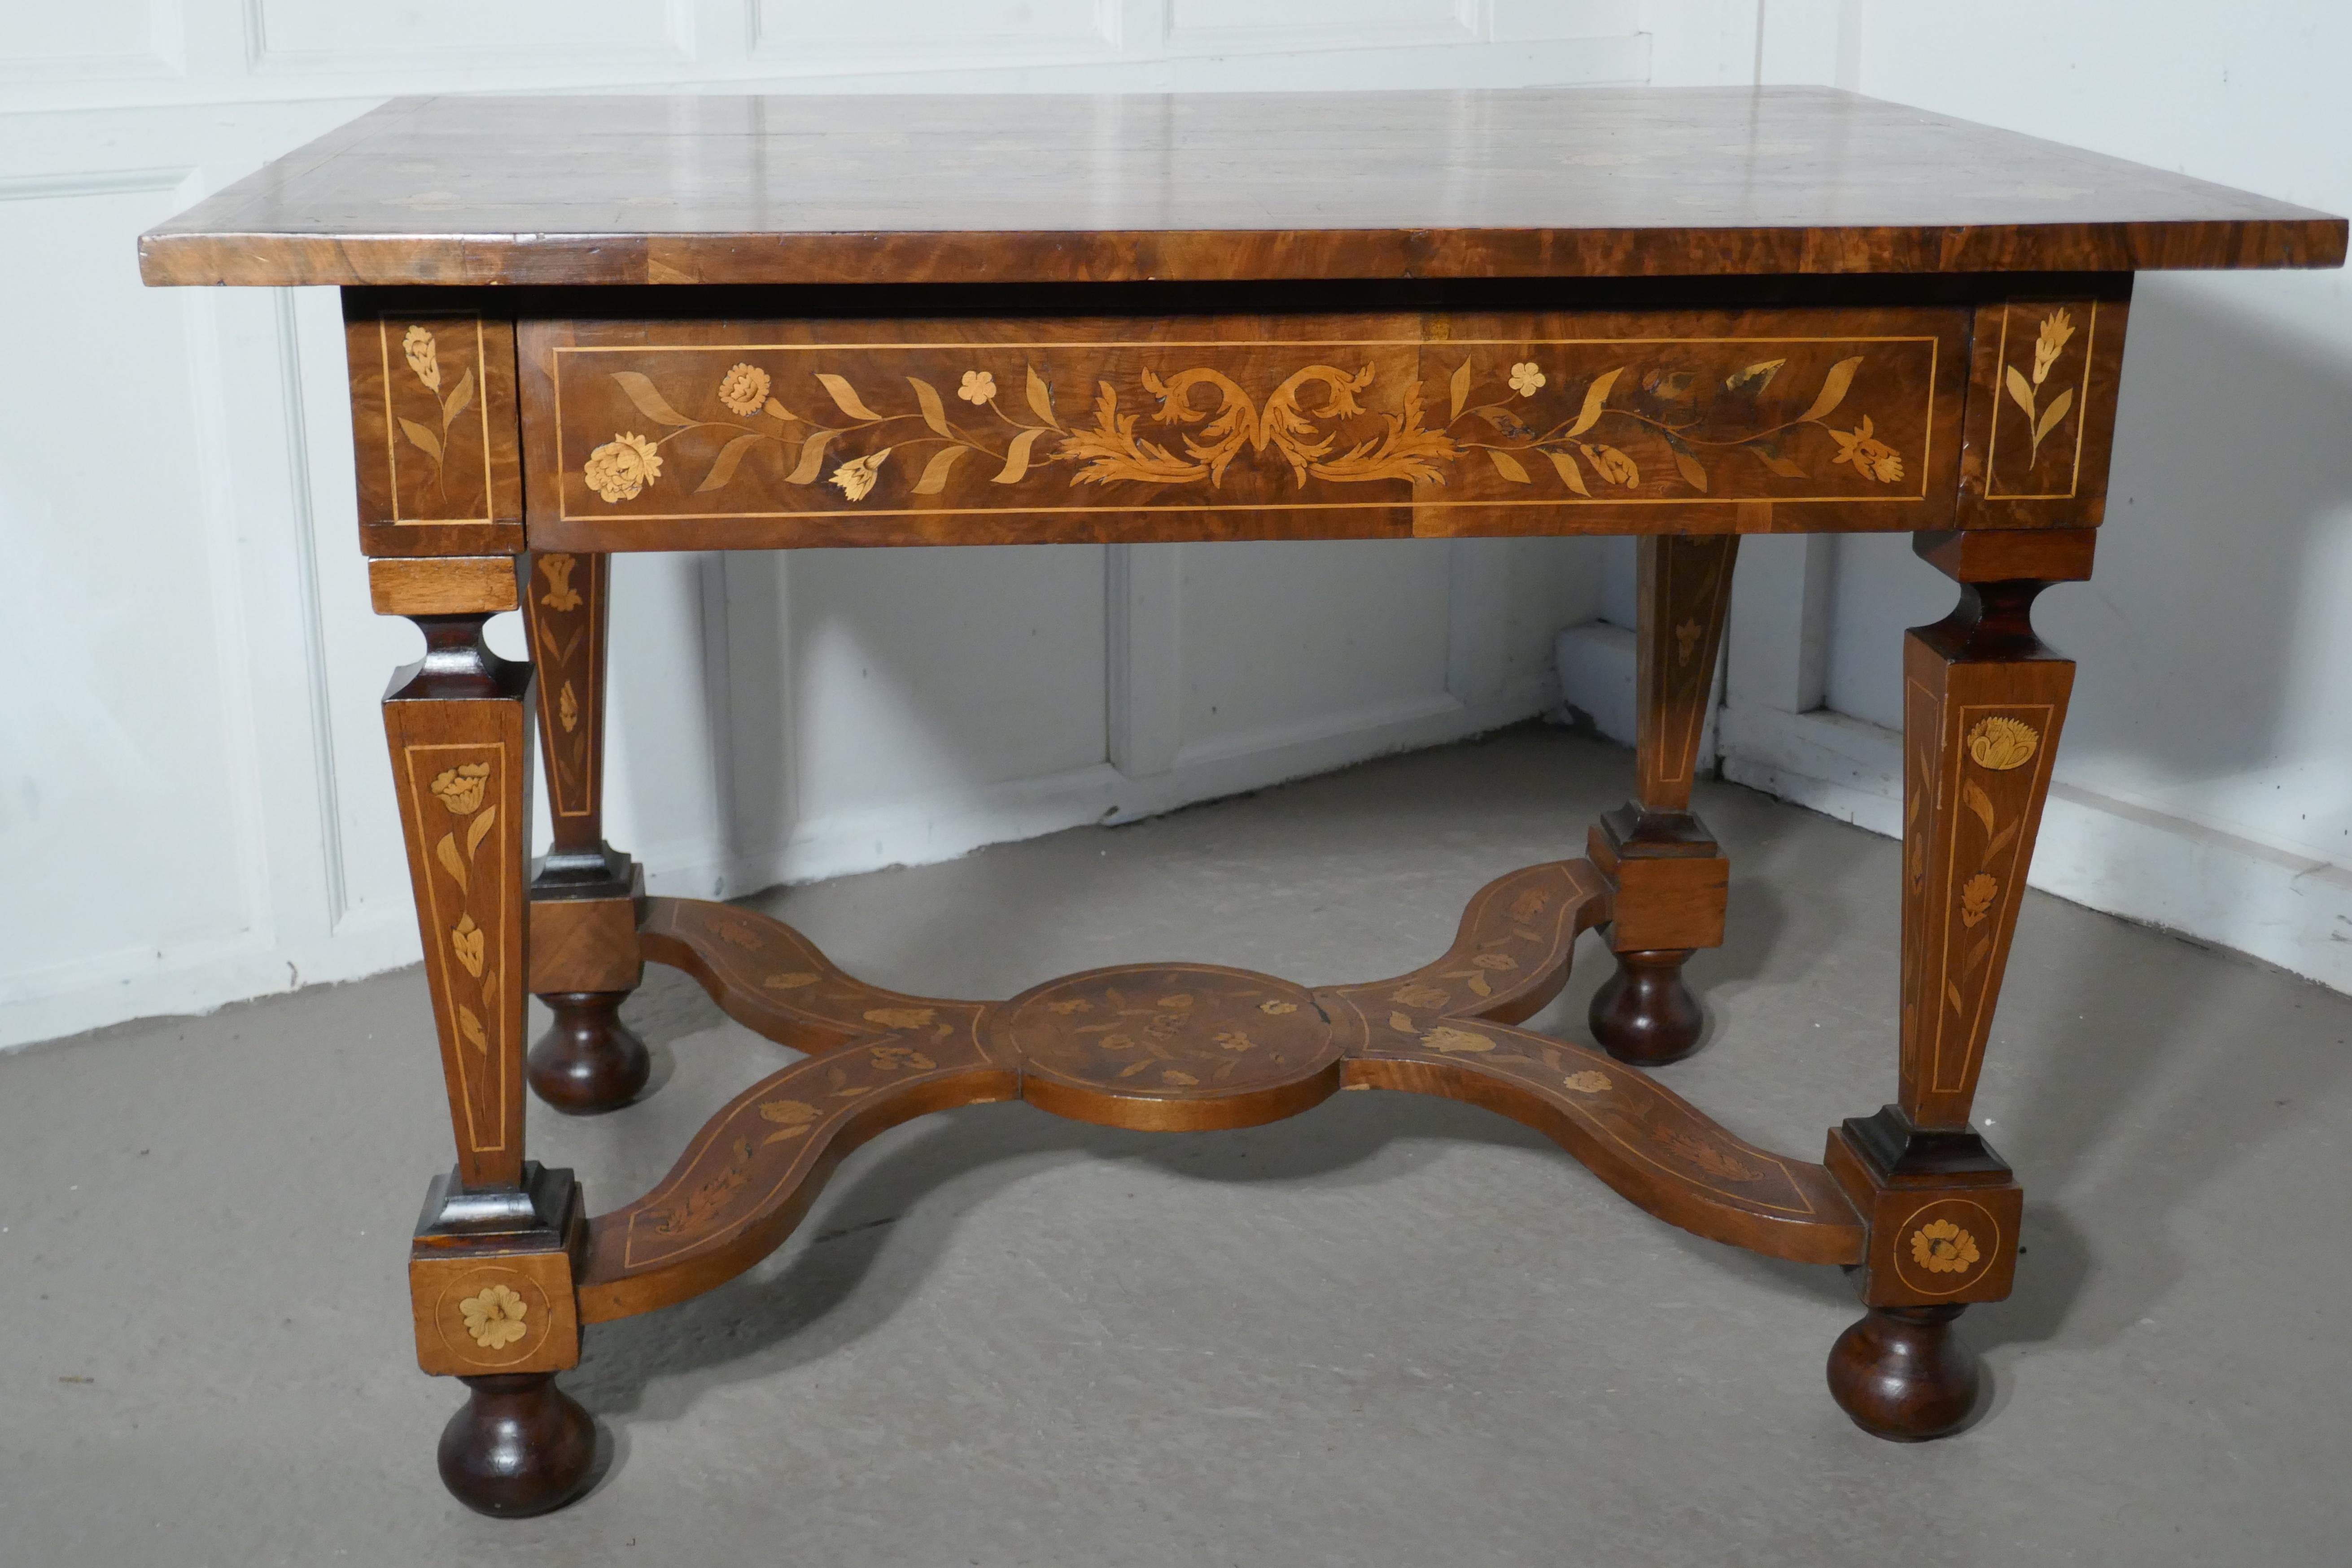 Dutch Colonial Early 19th Century Dutch Marquetry Inlaid Walnut Centre Table